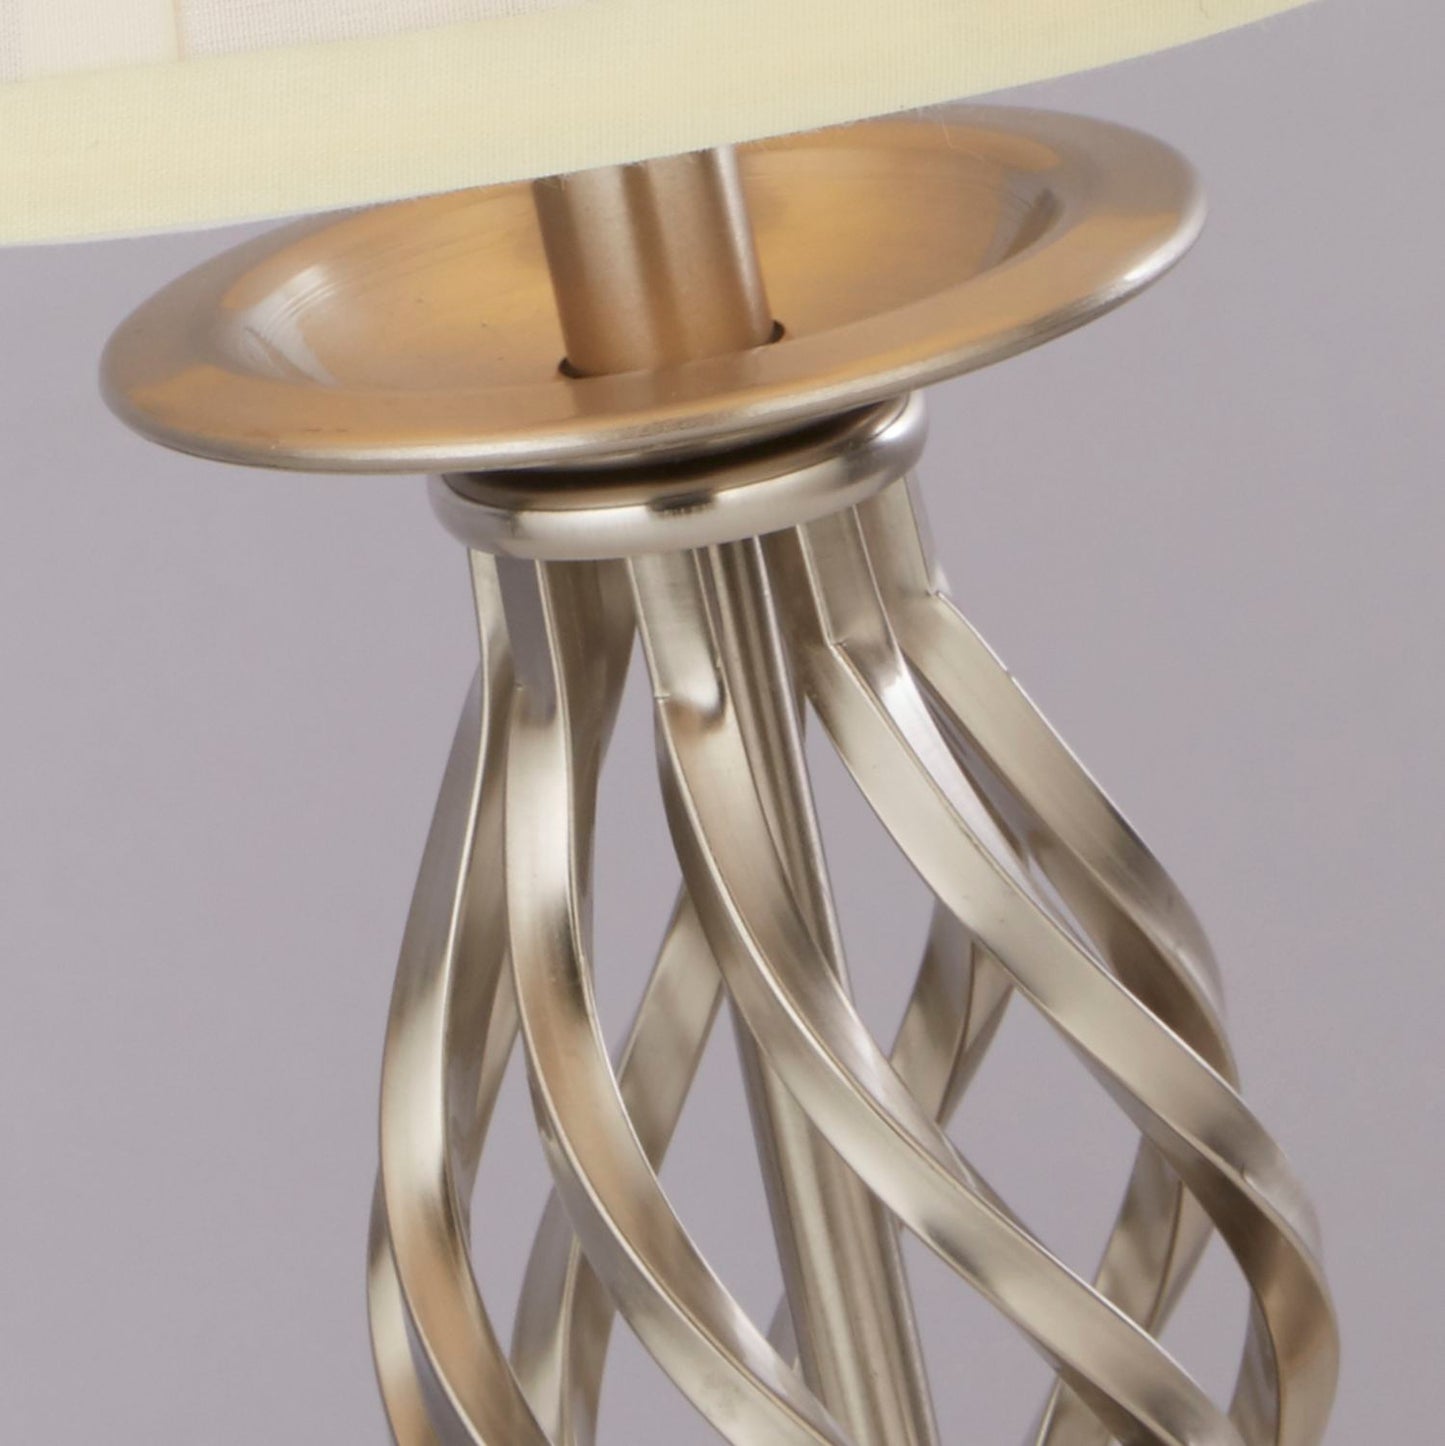 Satin Silver Touch Table Lamp